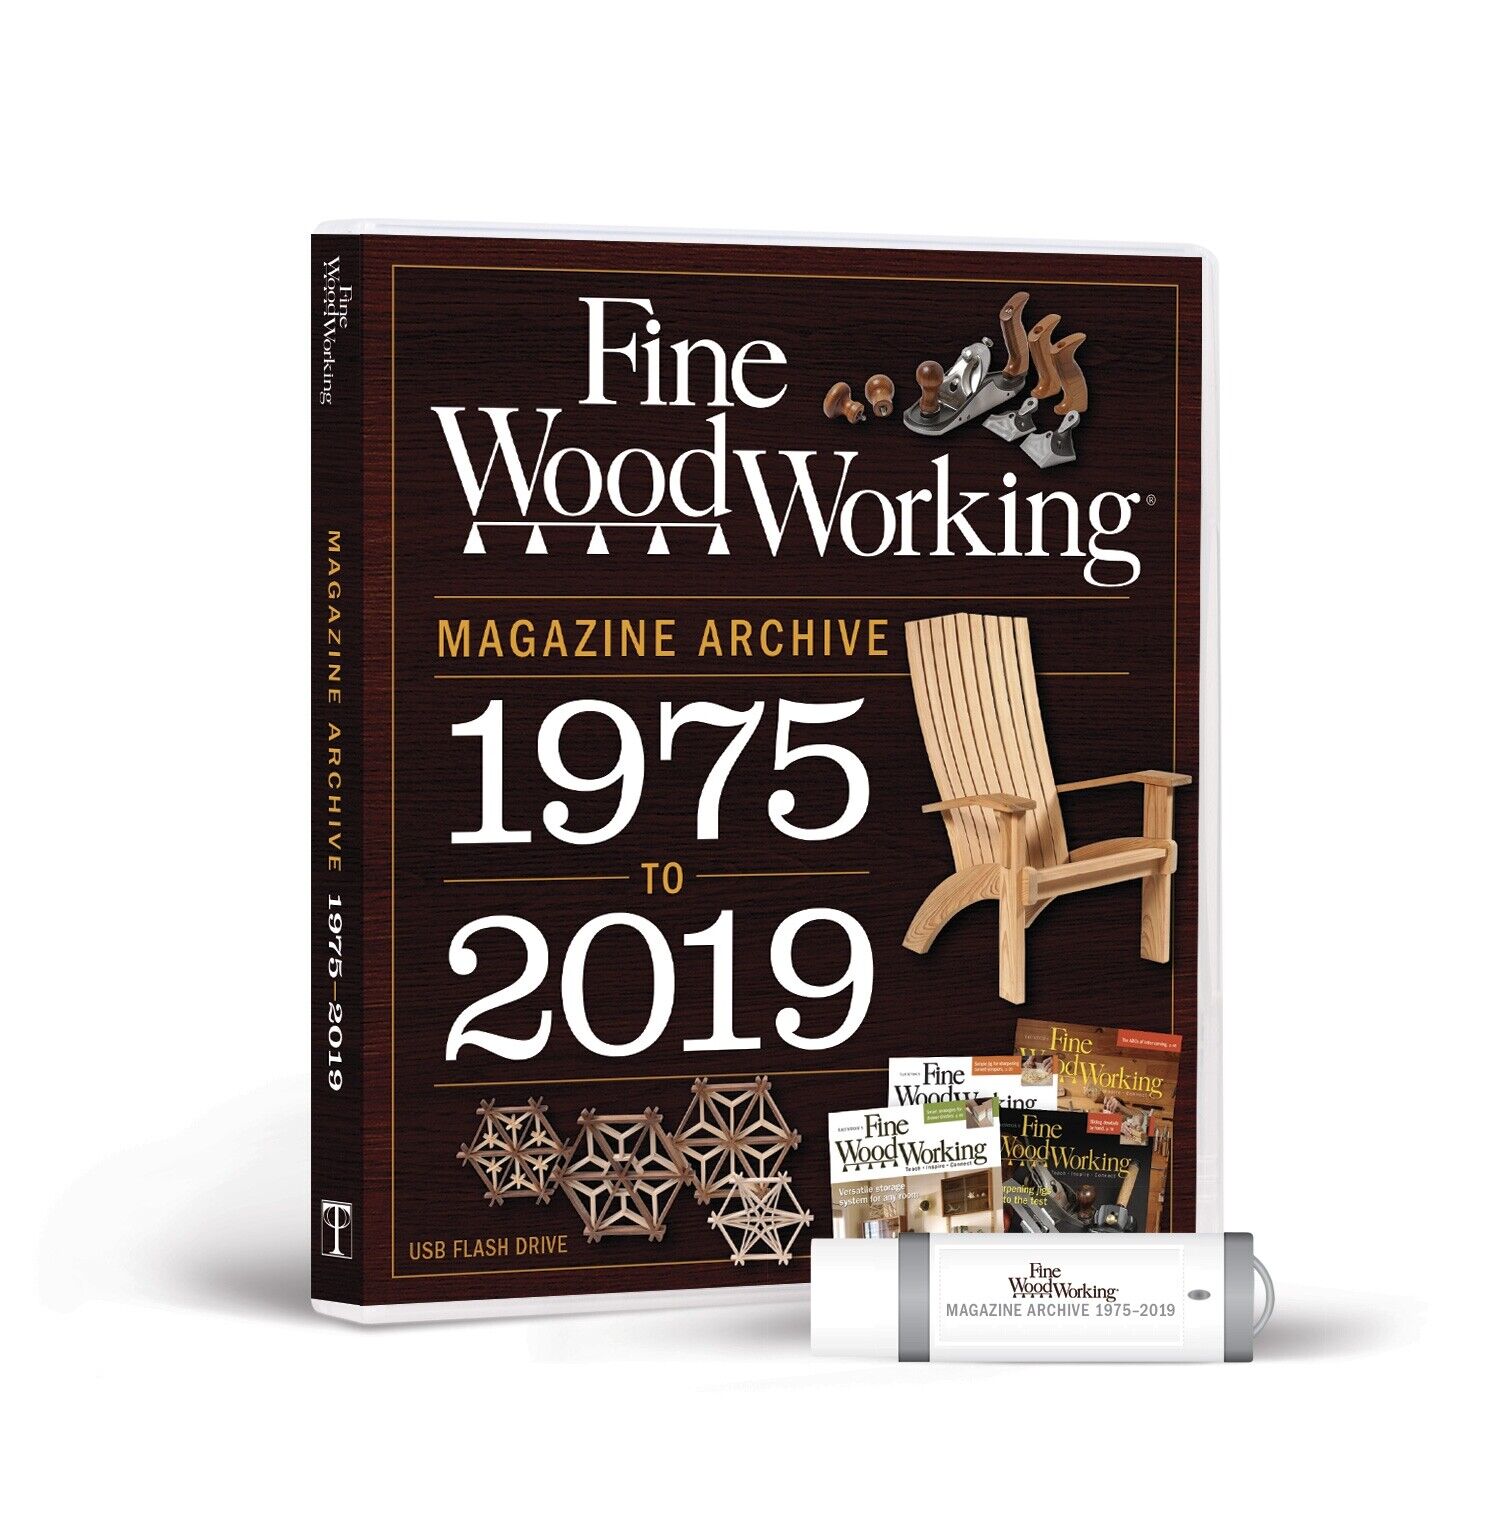 Fine Woodworking Magazine Archive 1975 To 2016 Usb Flash Drive For Sale Online Ebay